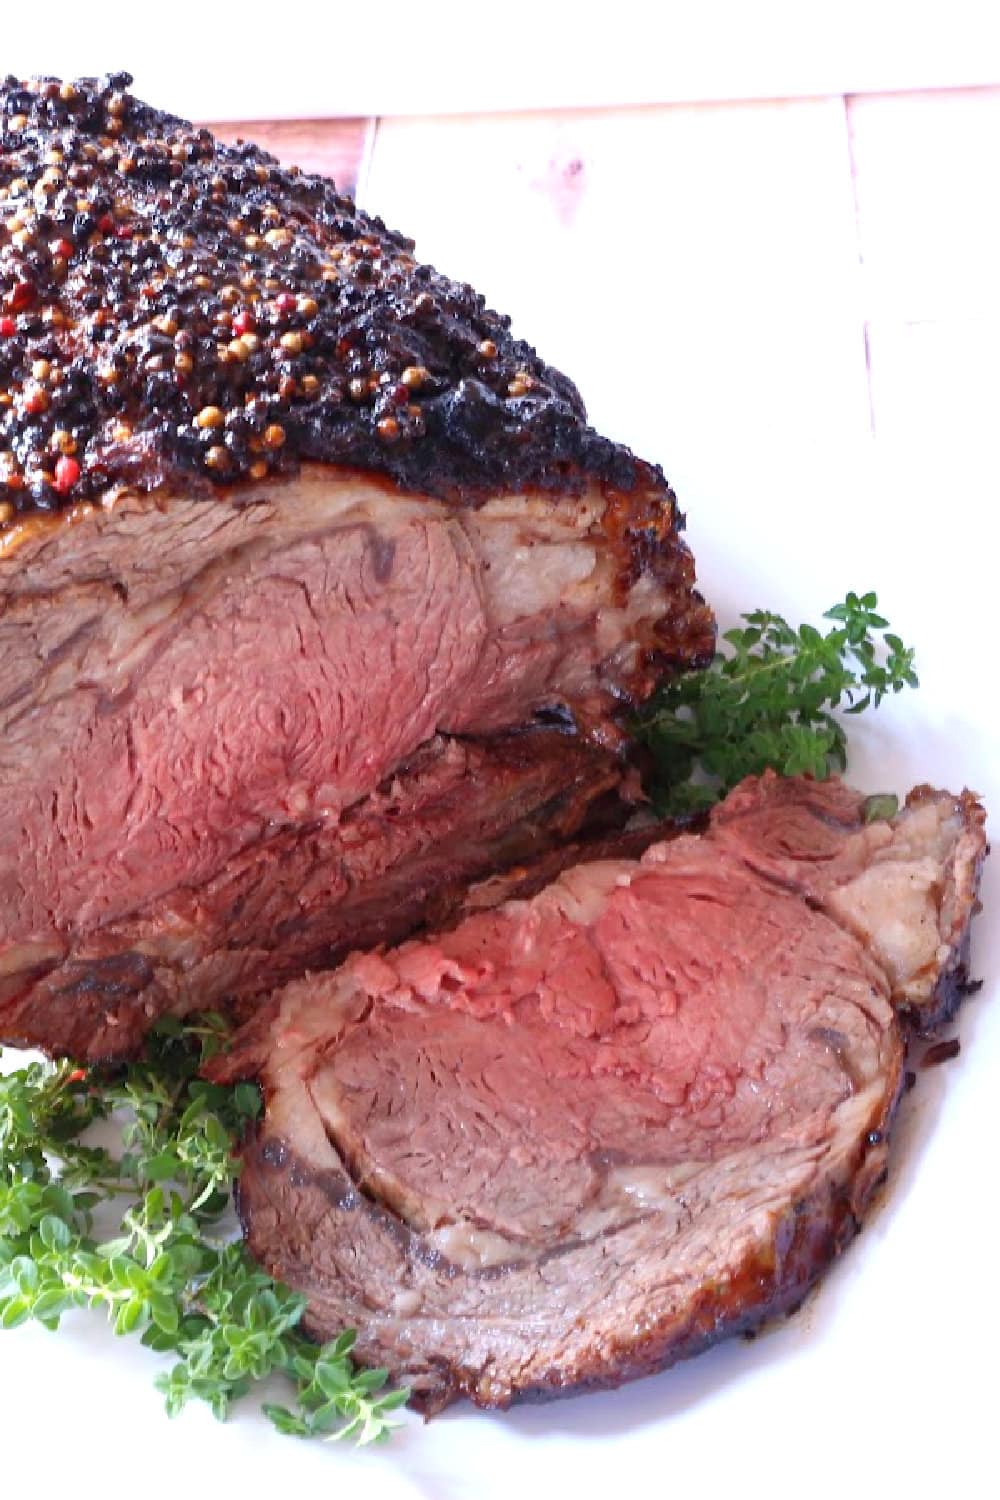 Sliced standing prime rib recipe using the 500 rule